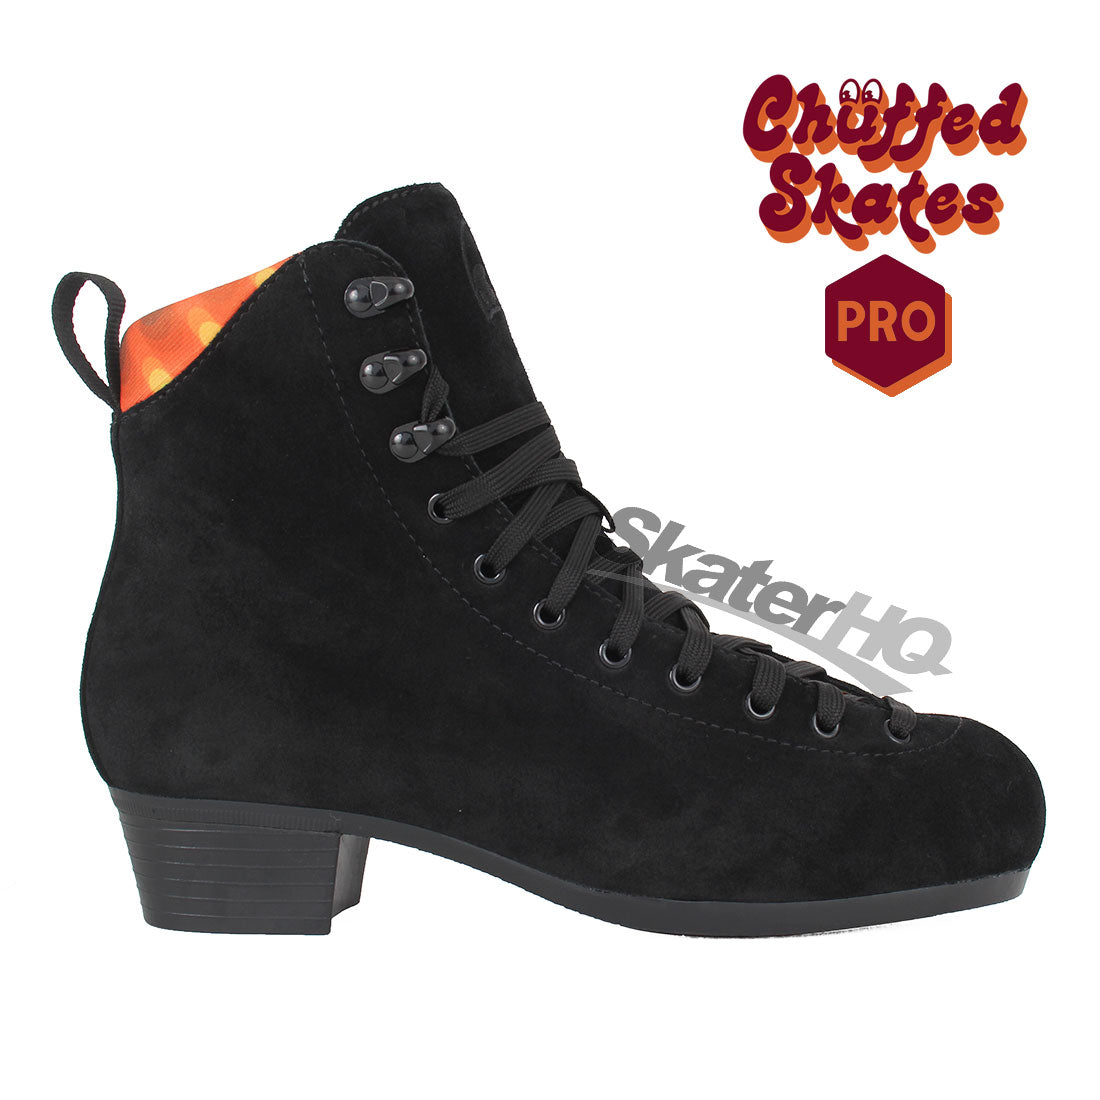 Chuffed Pro Boot Black 6US Roller Skate Boots